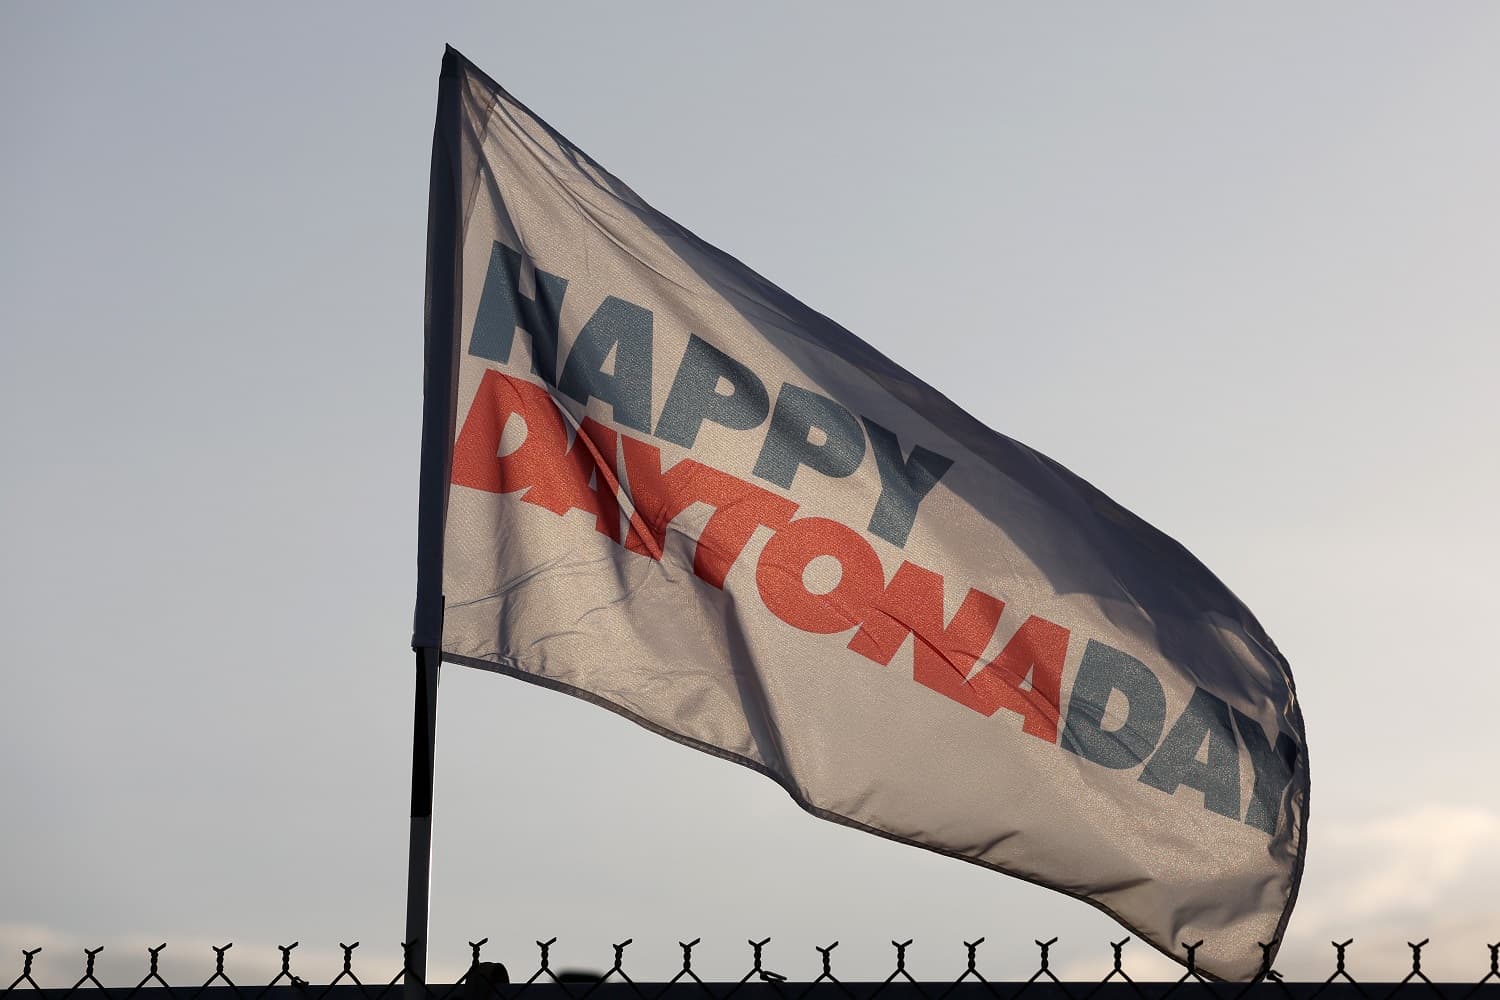 A "Happy Daytona Day" flag during the NASCAR Cup Series Daytona 500 on Feb. 19, 2023. | James Gilbert/Getty Images